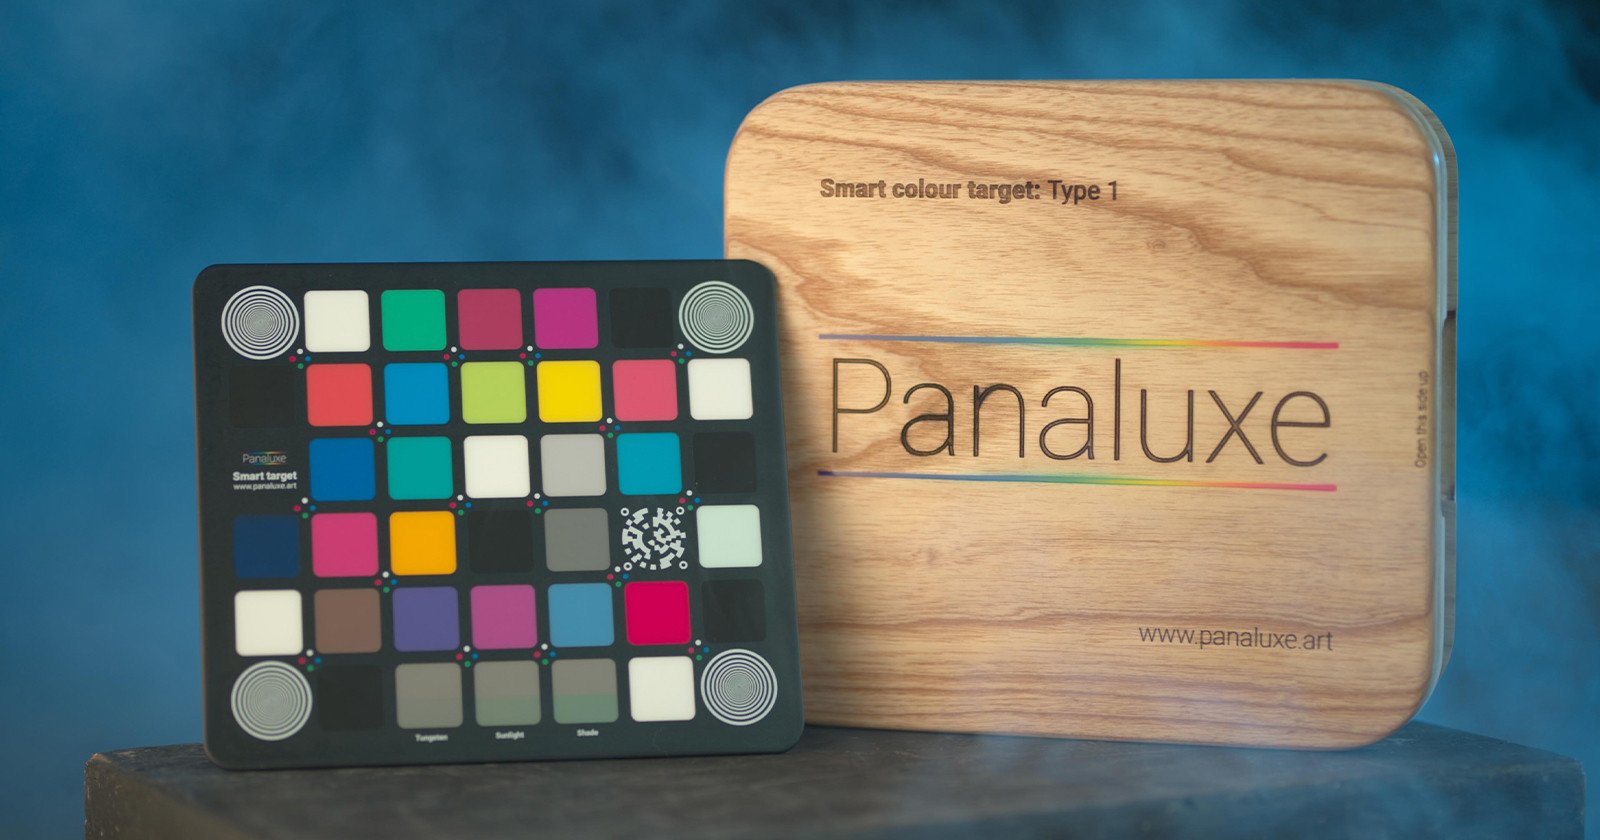 The Panaluxe Smart Color Target Can Instantly Color-Match Any Scene